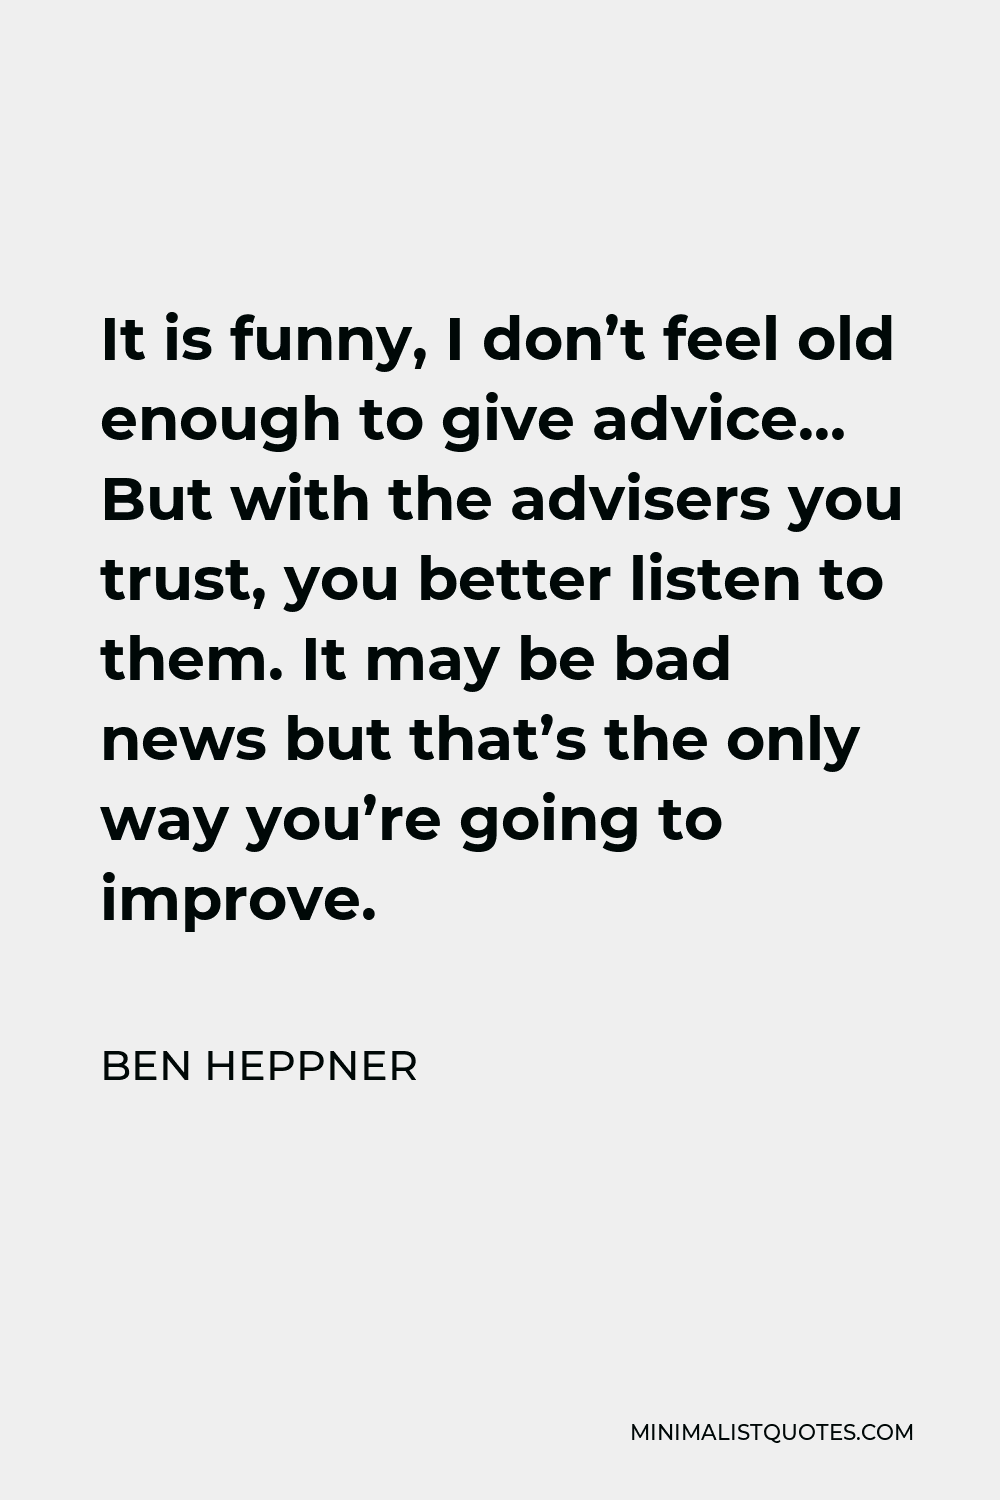 Ben Heppner Quote - It is funny, I don’t feel old enough to give advice… But with the advisers you trust, you better listen to them. It may be bad news but that’s the only way you’re going to improve.